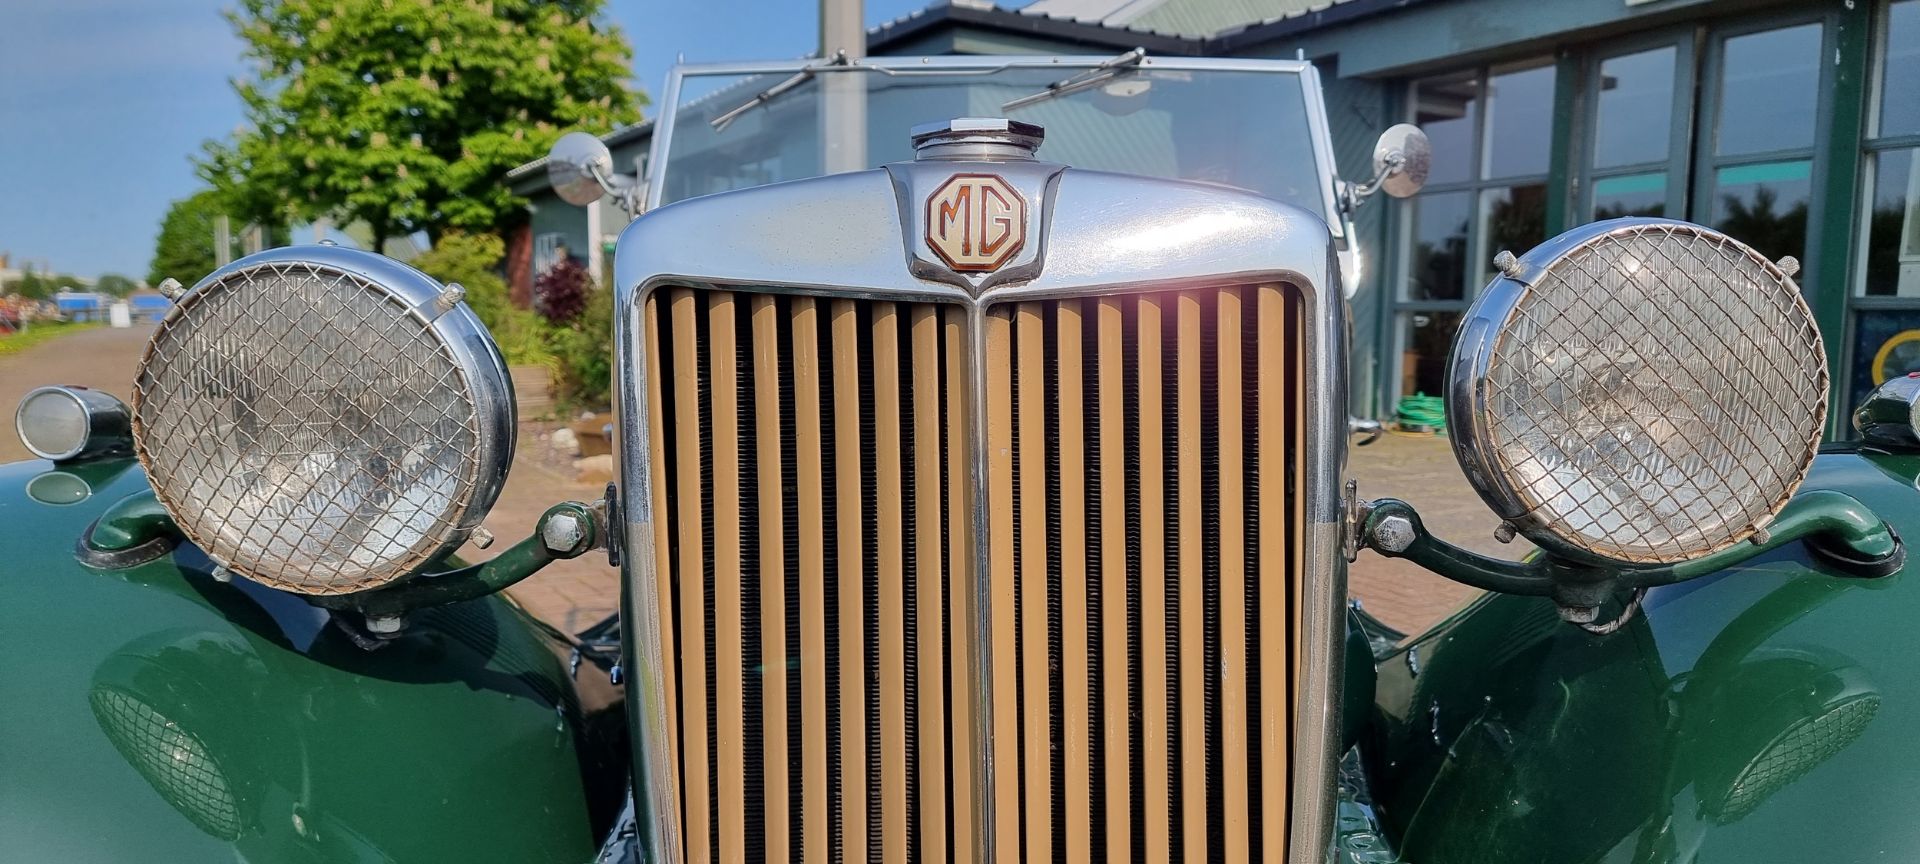 1951 MG TD/C, Mk 2, 1250cc. Registration number KAS 395 (non transferrable). Chassis number TD/ - Image 8 of 20